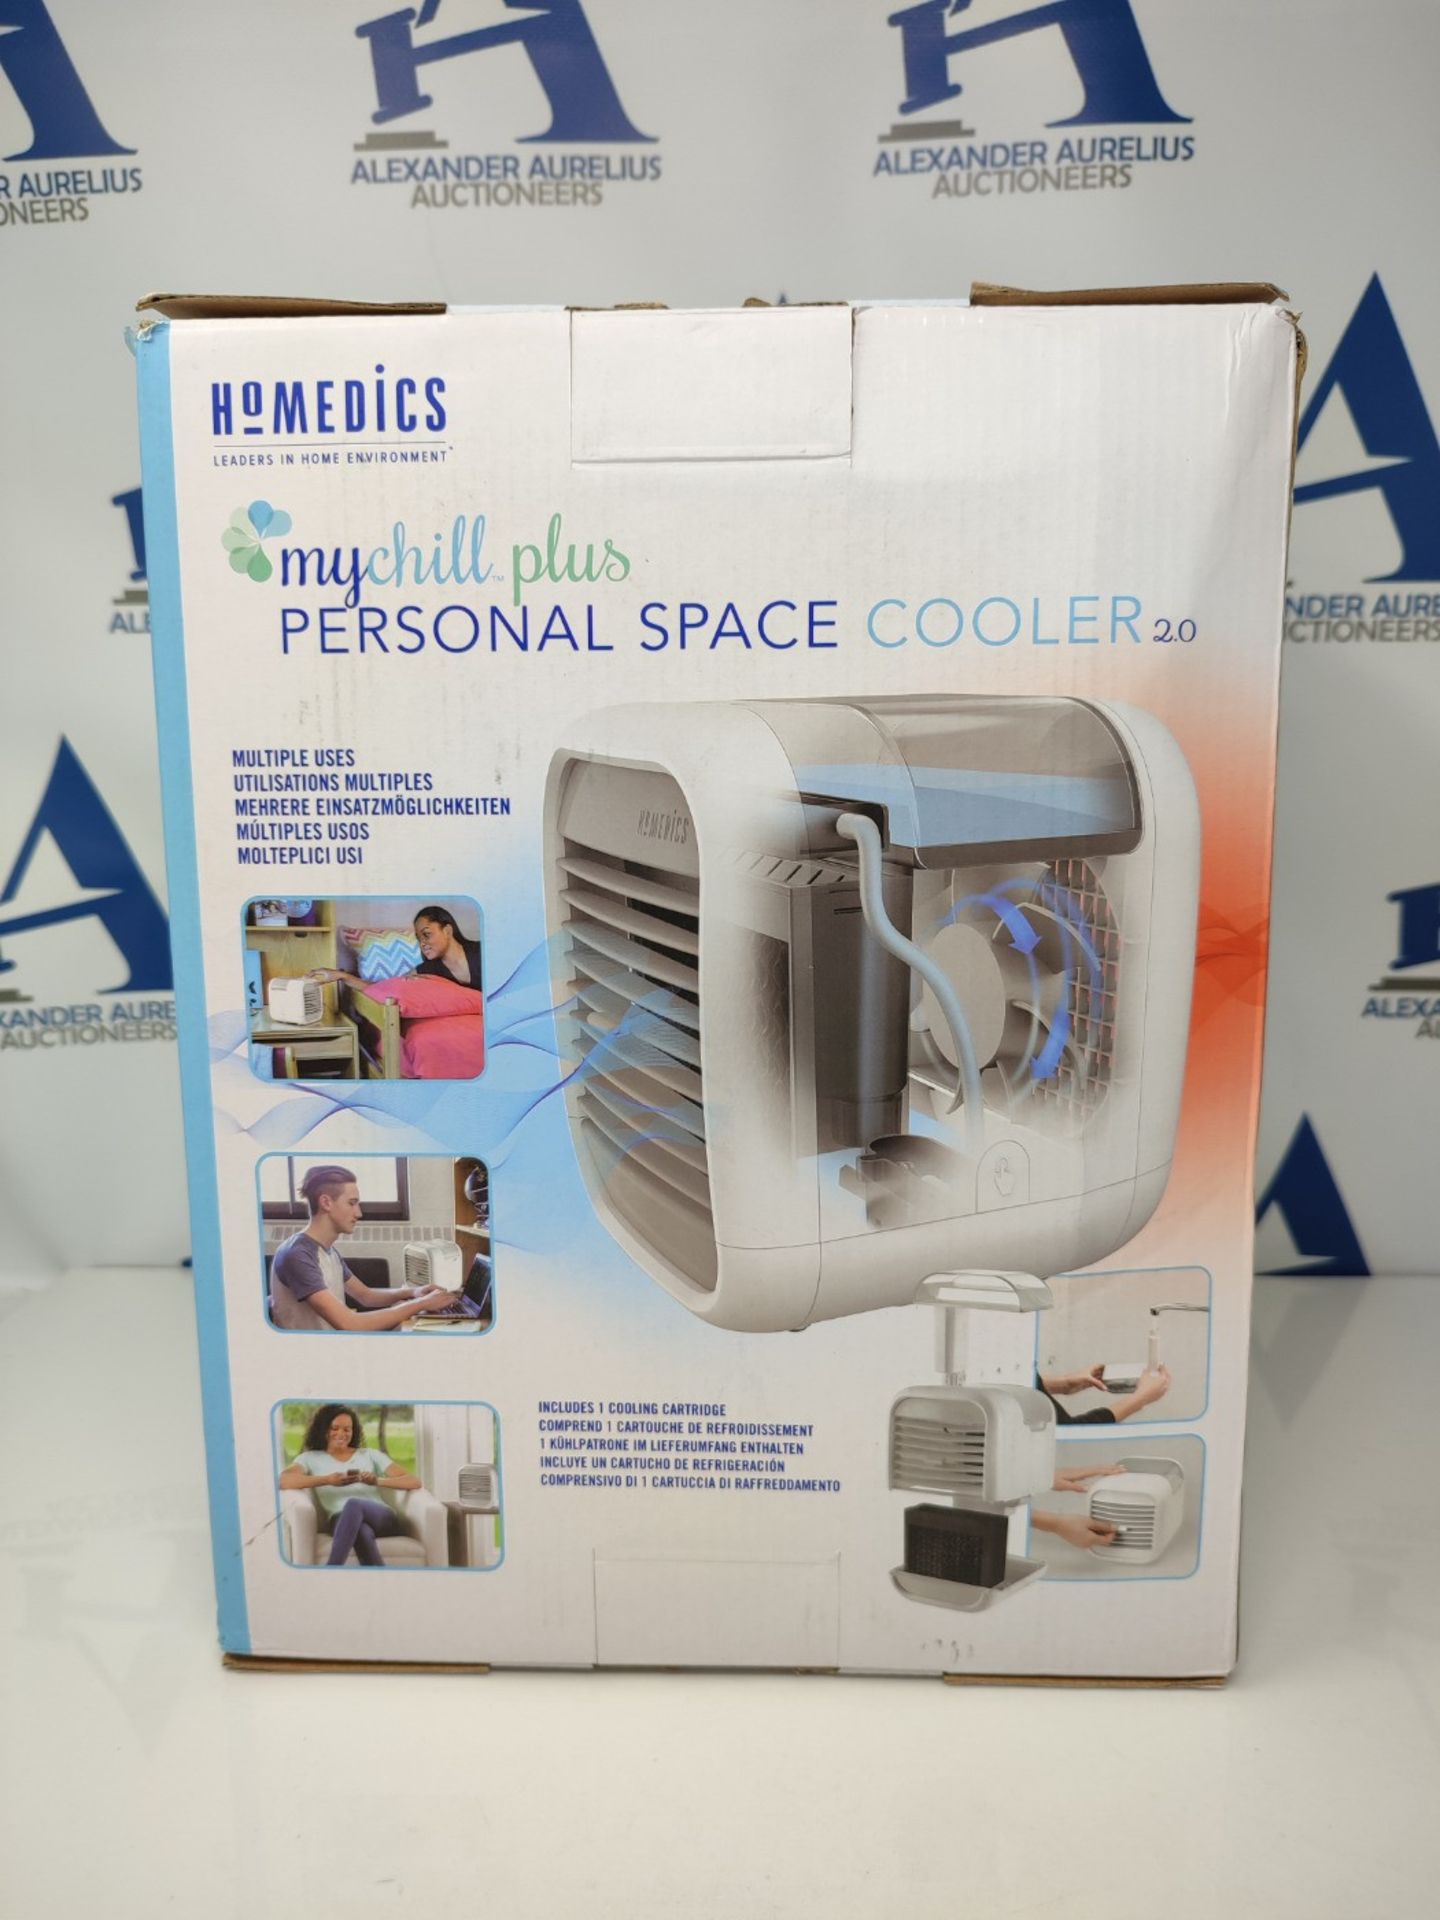 HoMedics PAC-35WT-EU2 Personal Space Cooler, MyChill Plus, 1.8 Metre Cooling Area, 3 S - Image 2 of 3